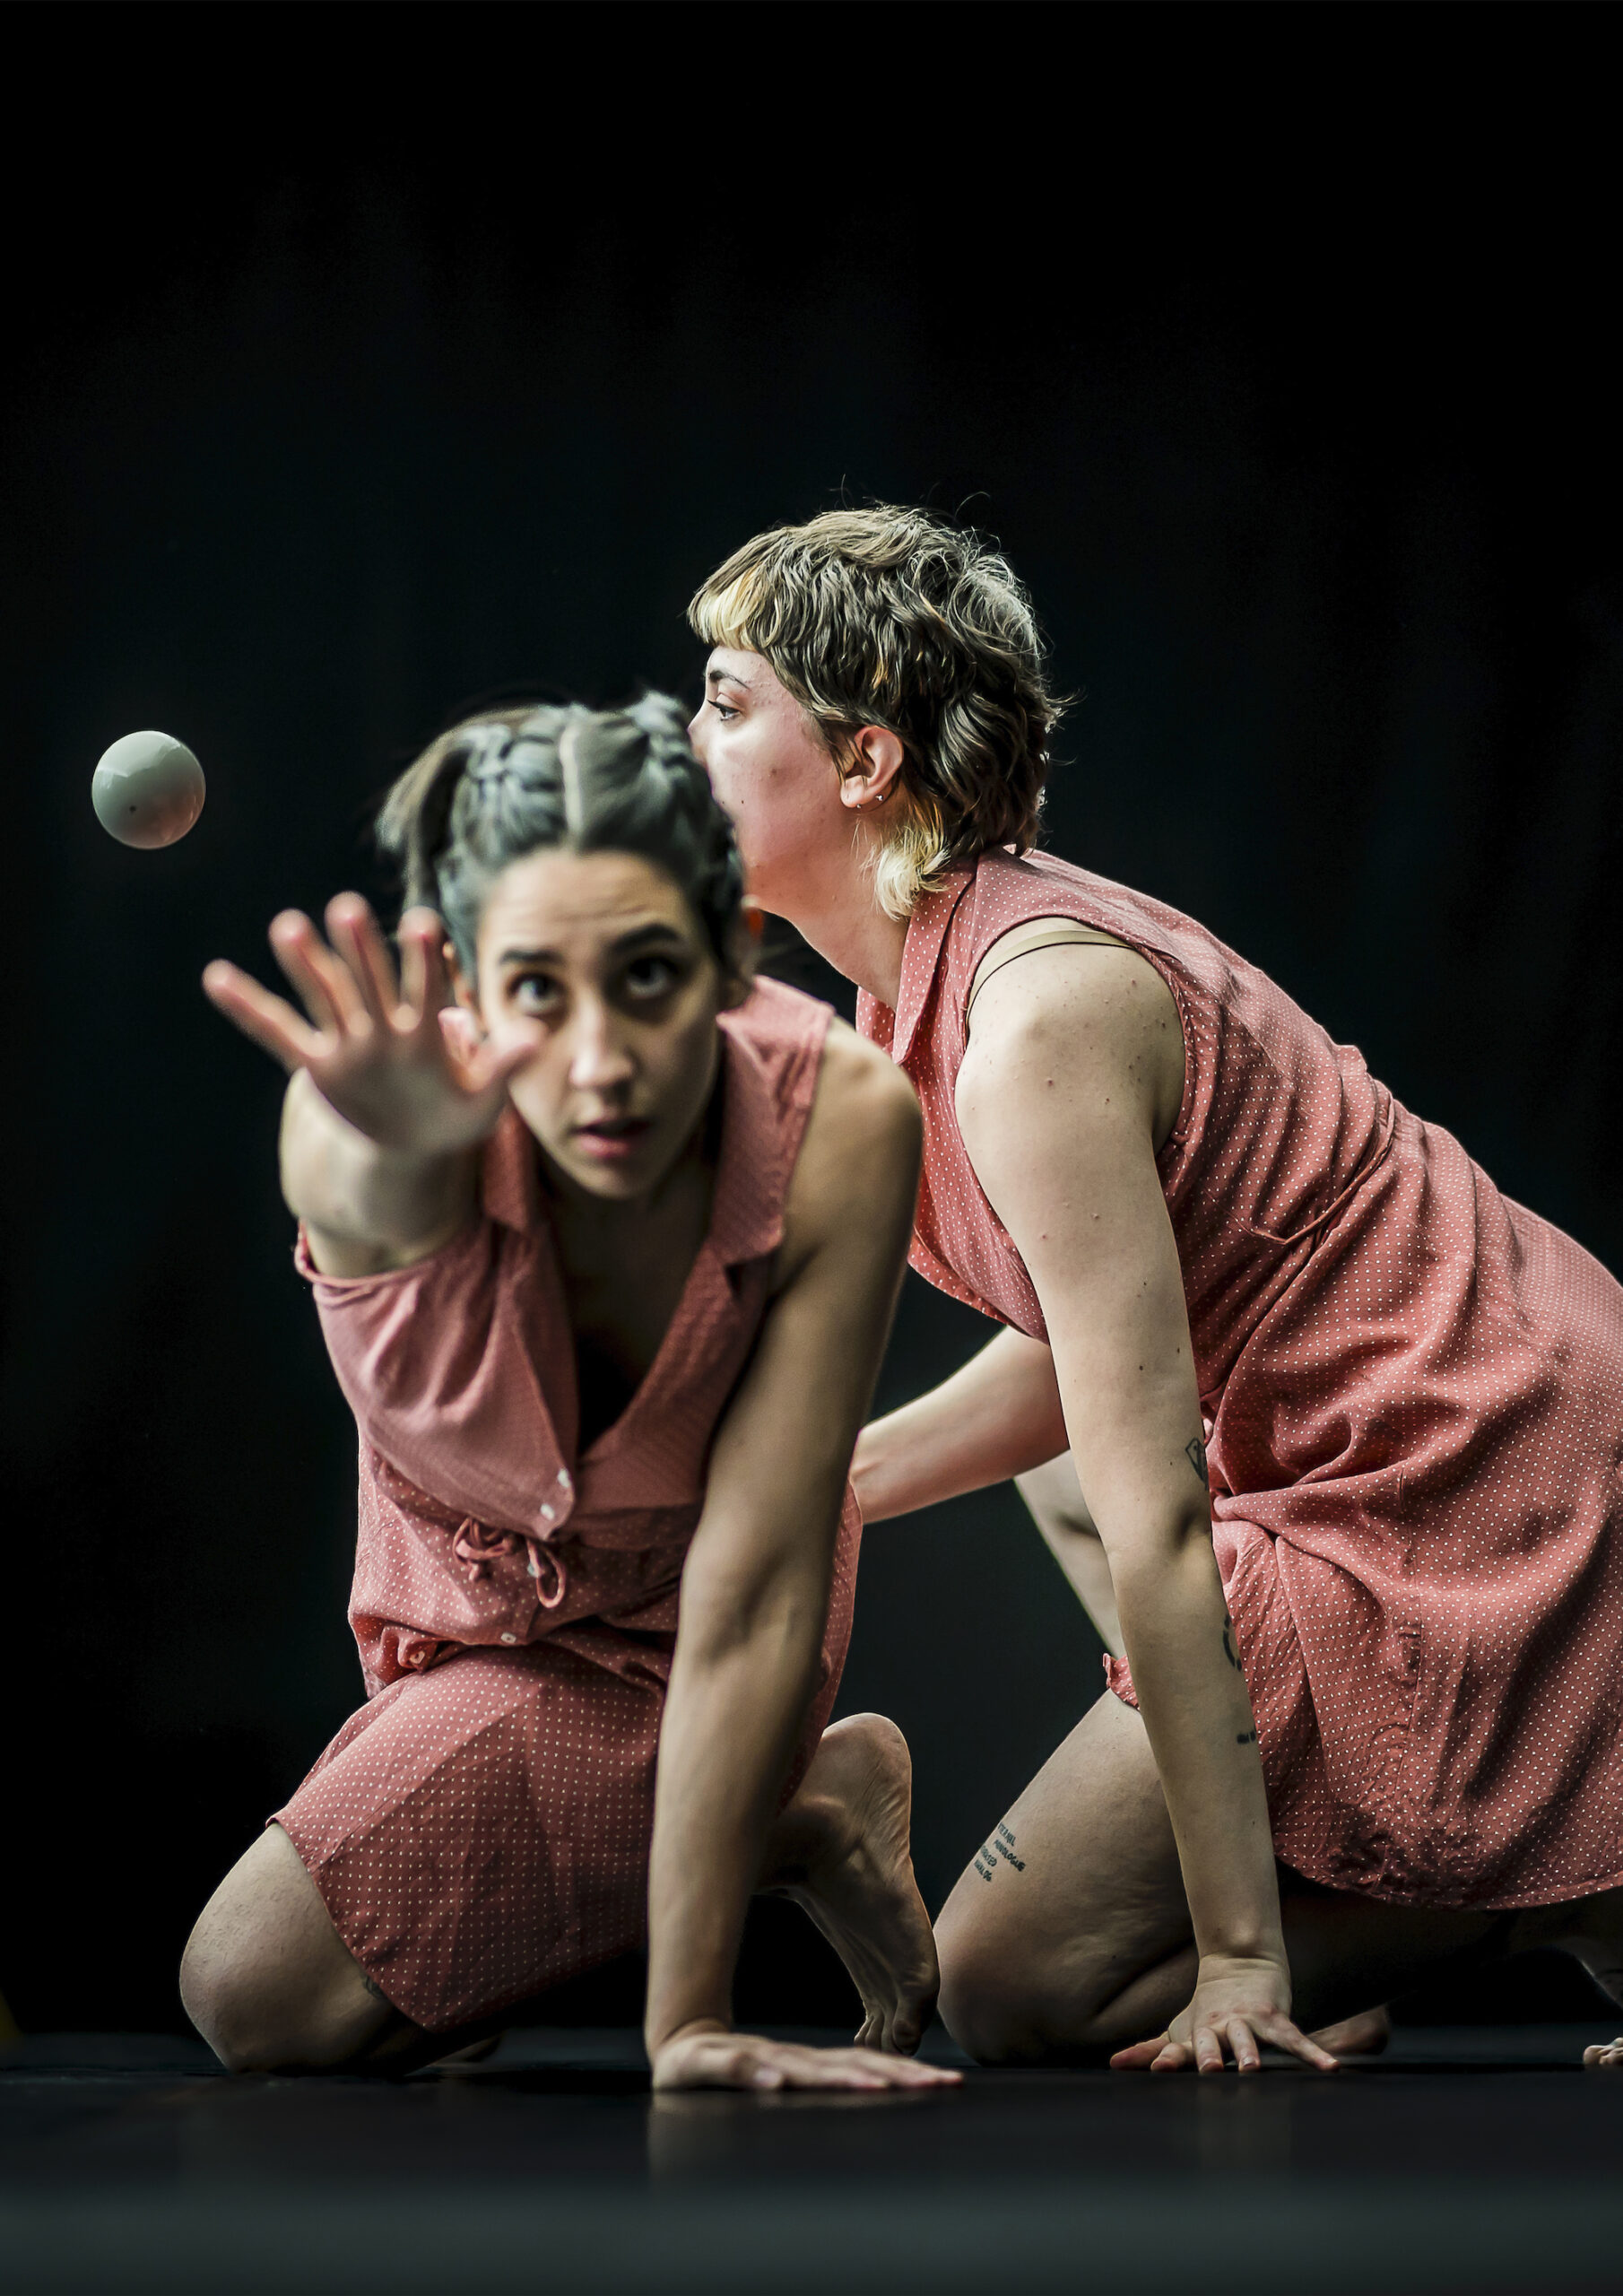 Gaby Merz' photograph of circus duo act Cie. Soif Totale at the FIRCO festival